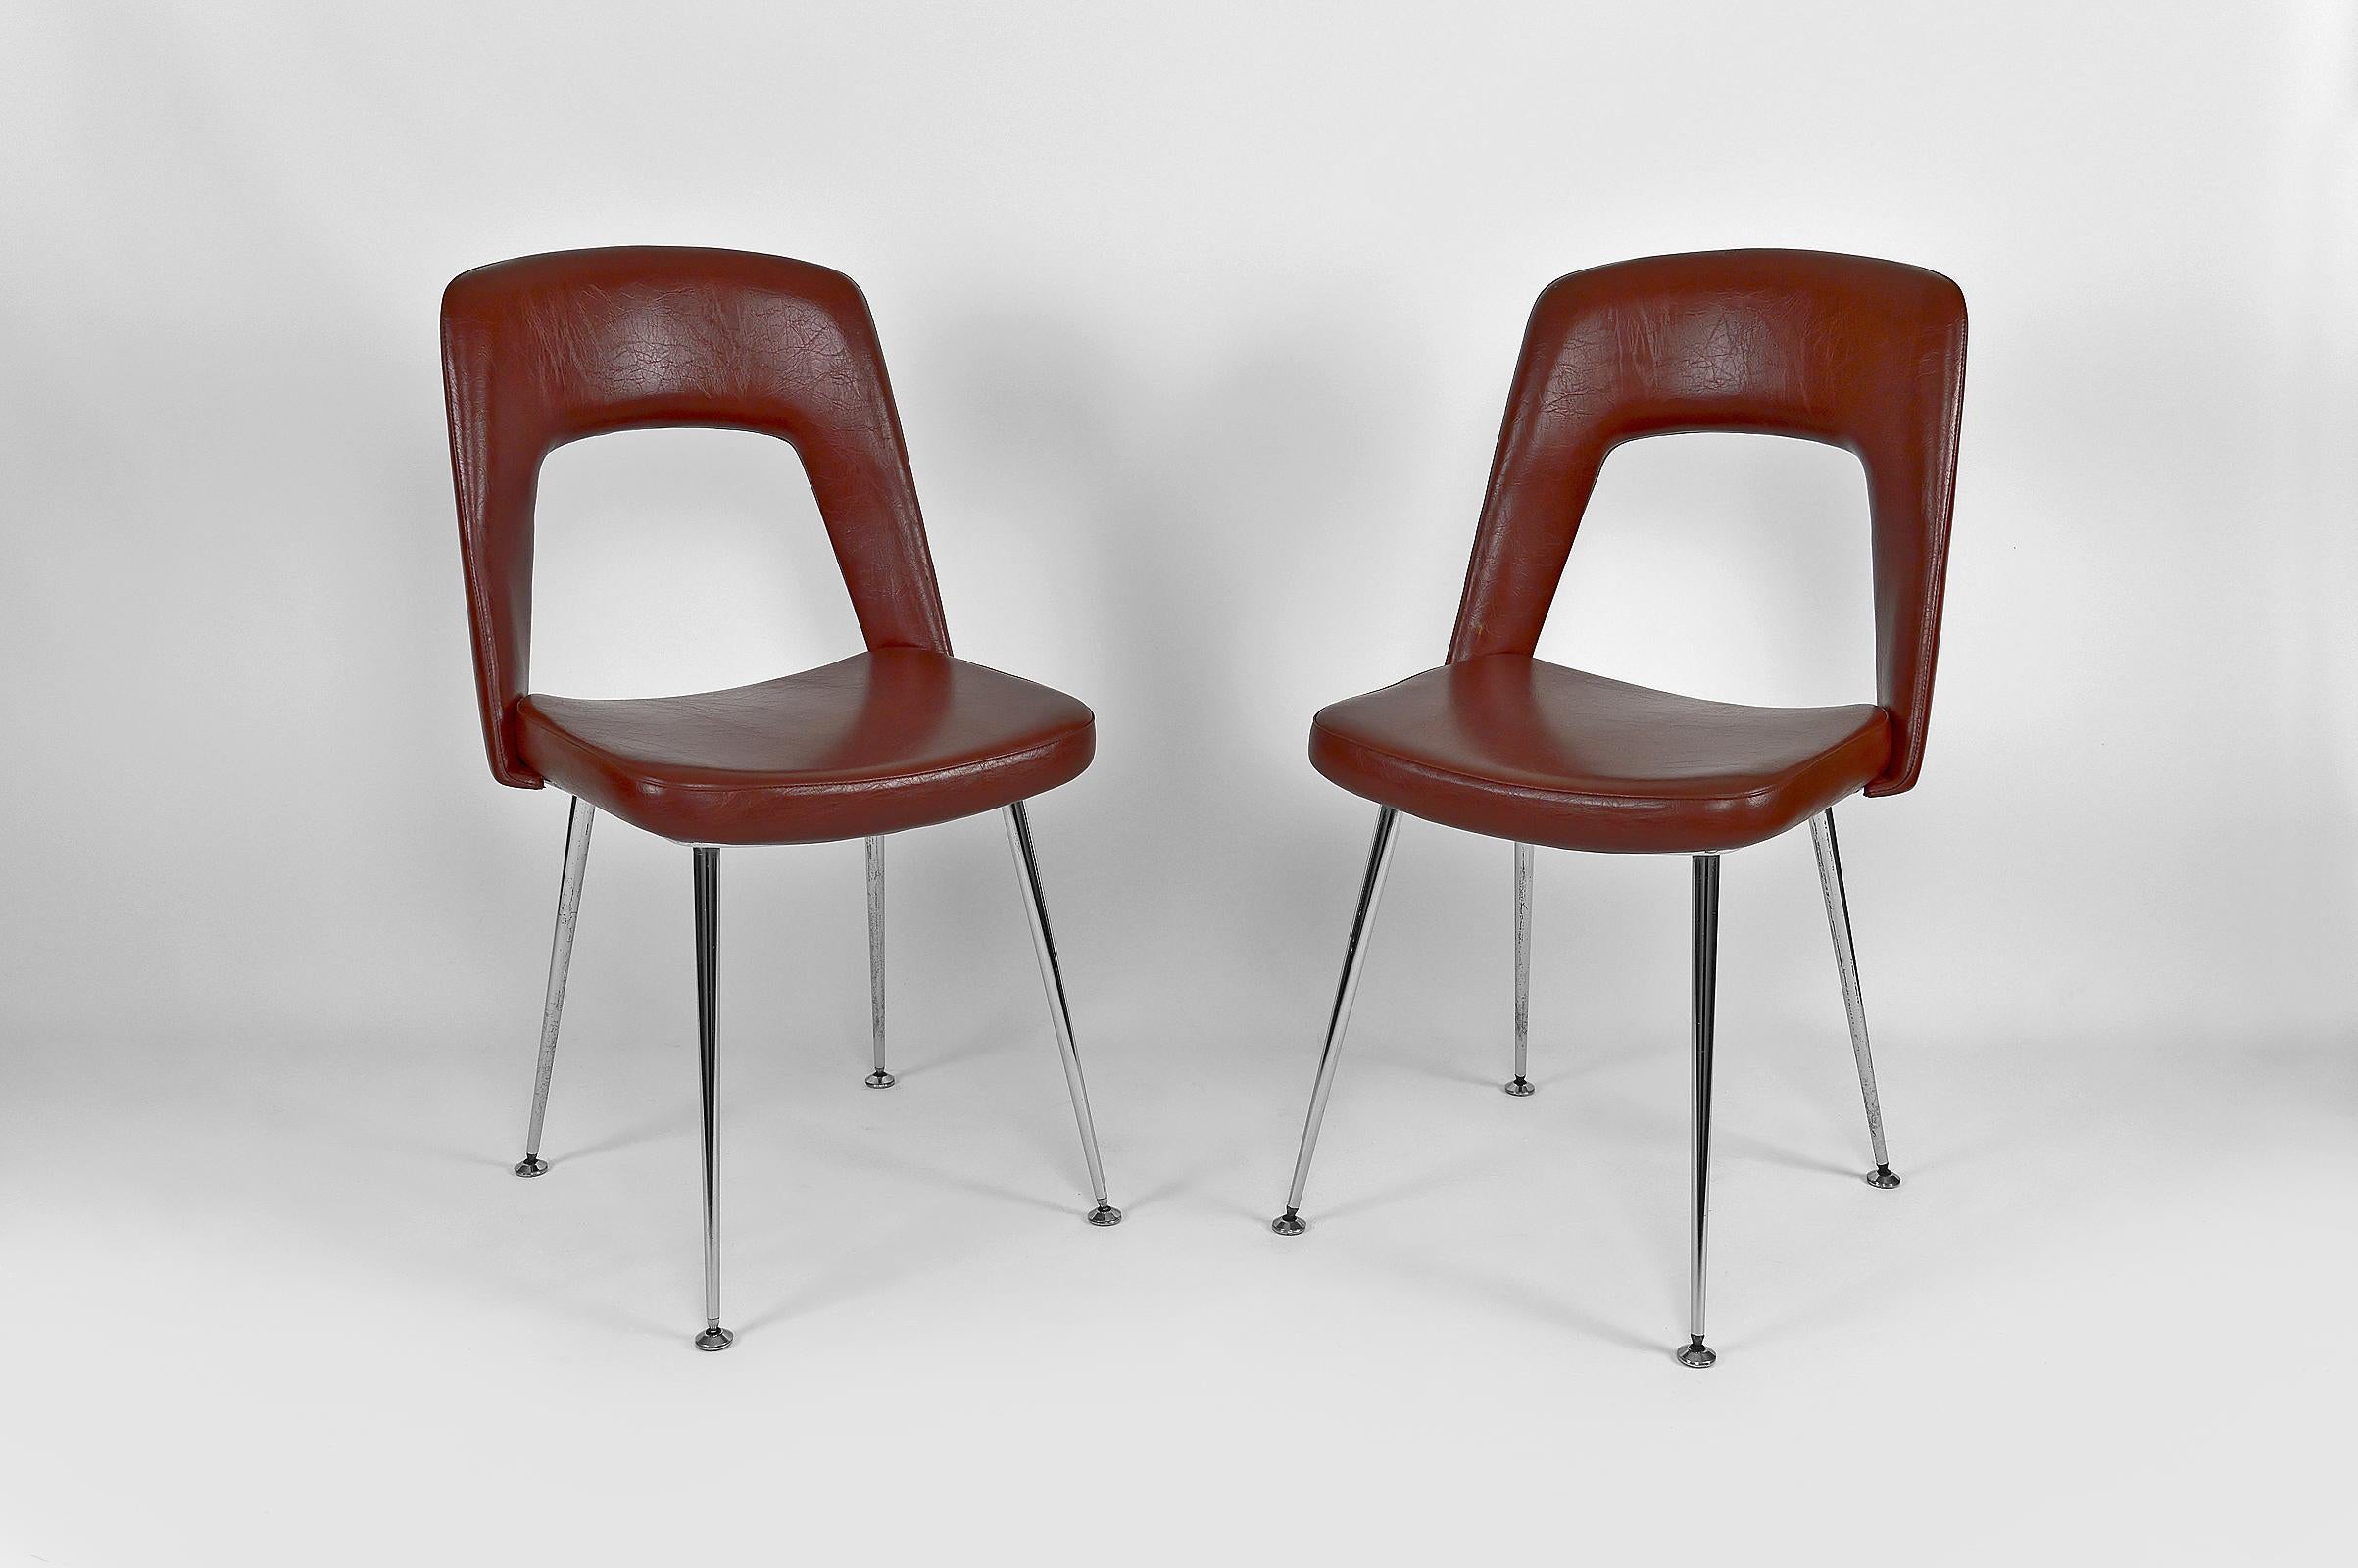 Elegant pair of office / desk / conference chairs.

Chrome structure, seat and backrest in brown / tan leatherette / faux-leather.

Mid-Century Modern, Europe, circa 1960-1970.
Unsigned, possibly by designer Eero Saarinen for Knoll.

In good